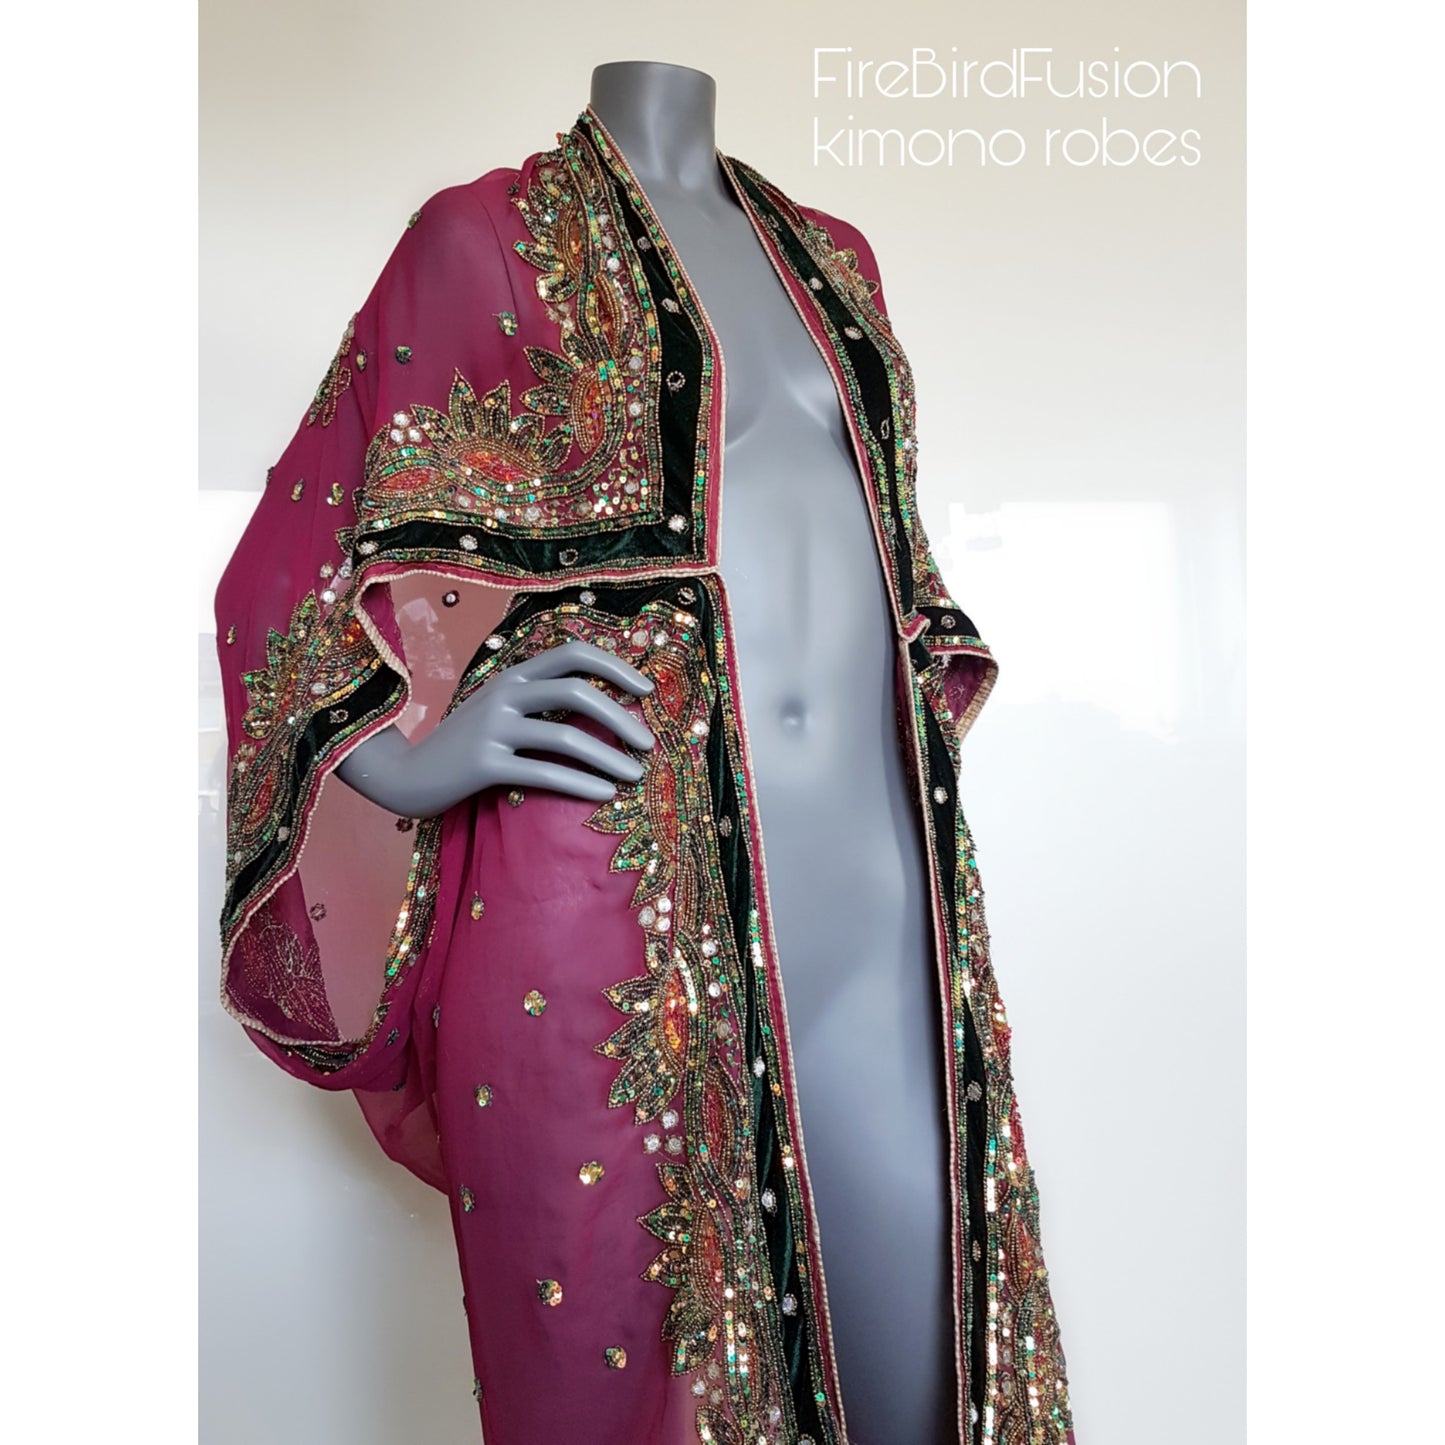 Luxurious semi sheer draped kimono in rich dark pink, beautifully hand embroidered with velvet appliques (L)